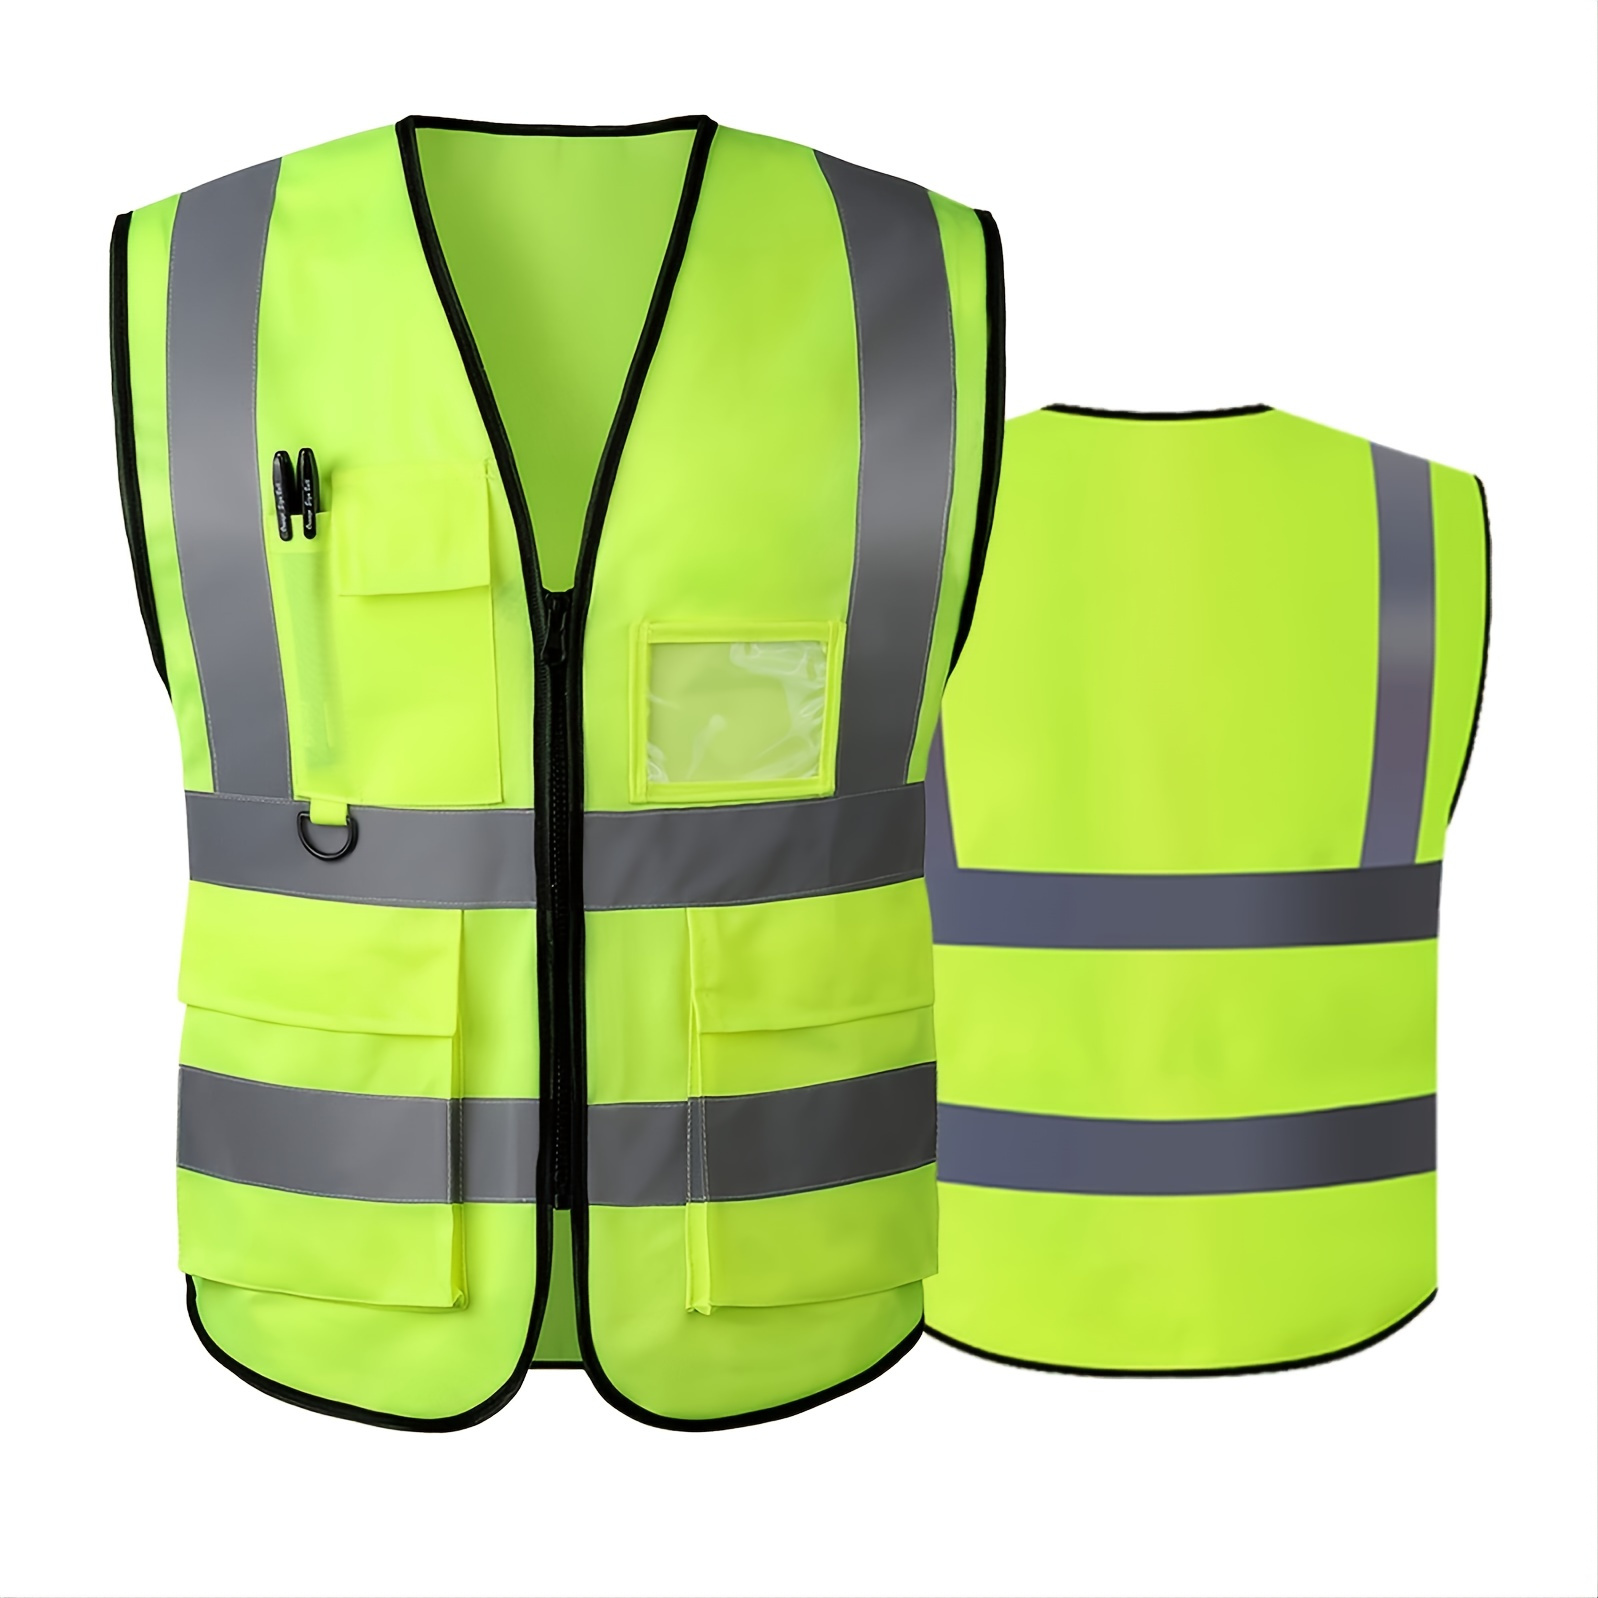 Final Clearance! Outdoor Adjustable Reflective Jackets Vest Unisex Safety  Protection Running Vest High Visibility Breathable Strap Safety Gear  Jogging